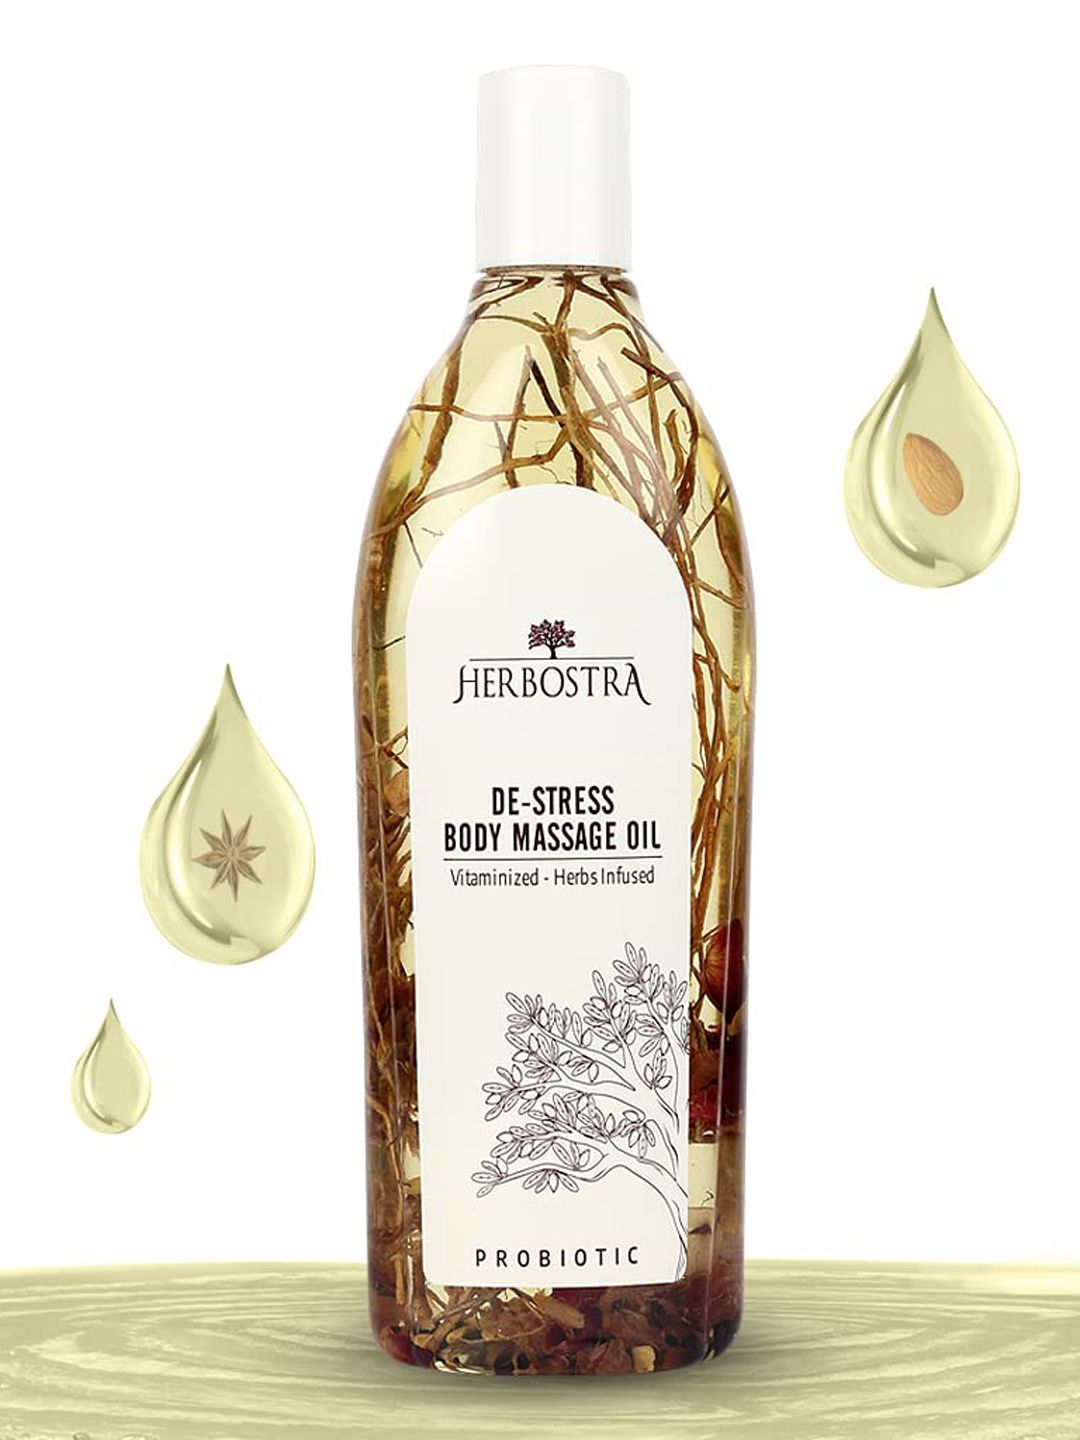 Herbostra Yellow Body Massage Oil Price in India